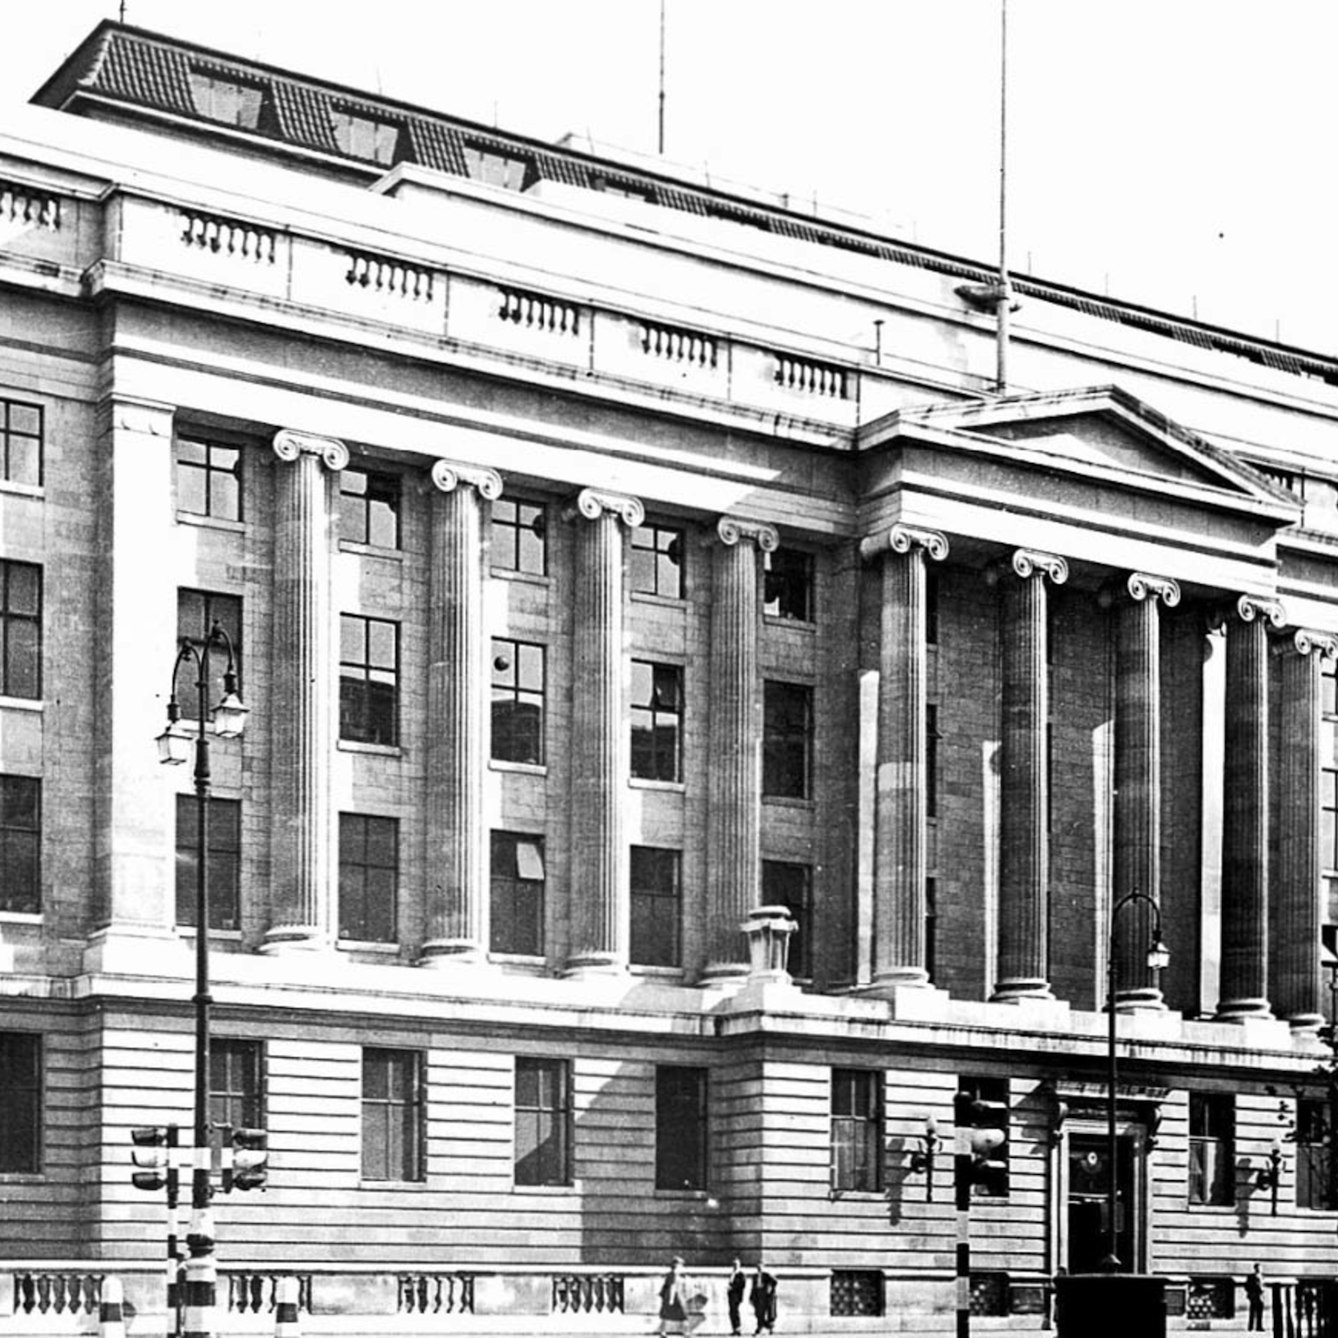 1930s black and white photograph of grand neo-classical museum building